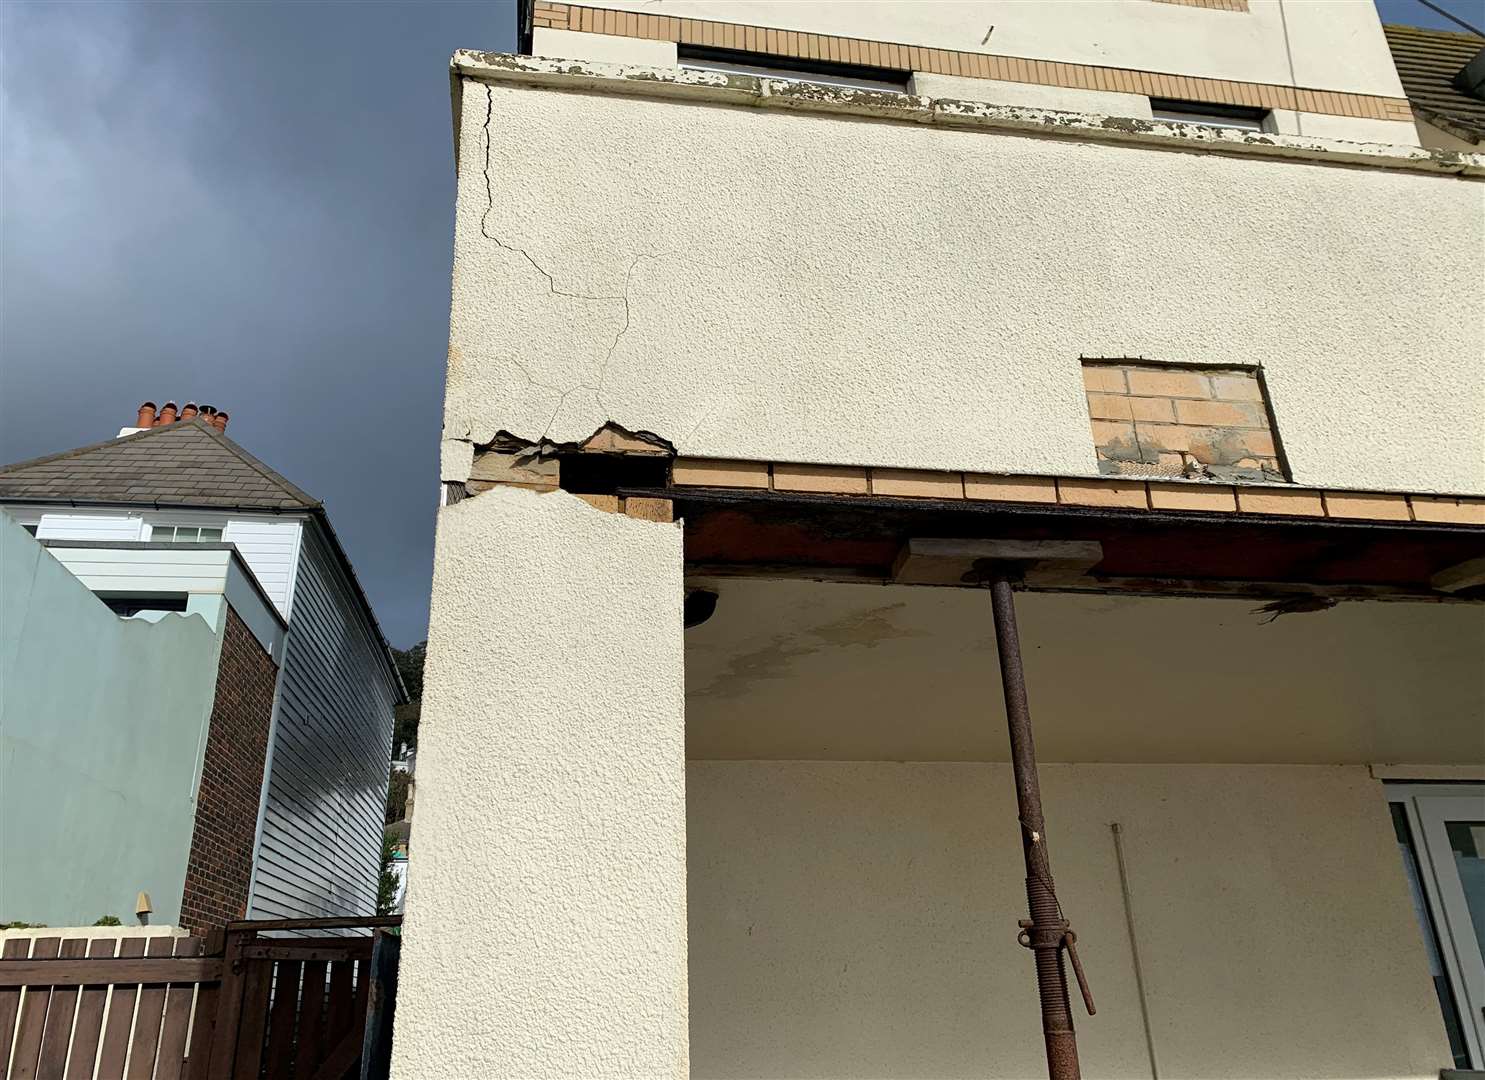 There have been issues with subsidence for years at Homevale House